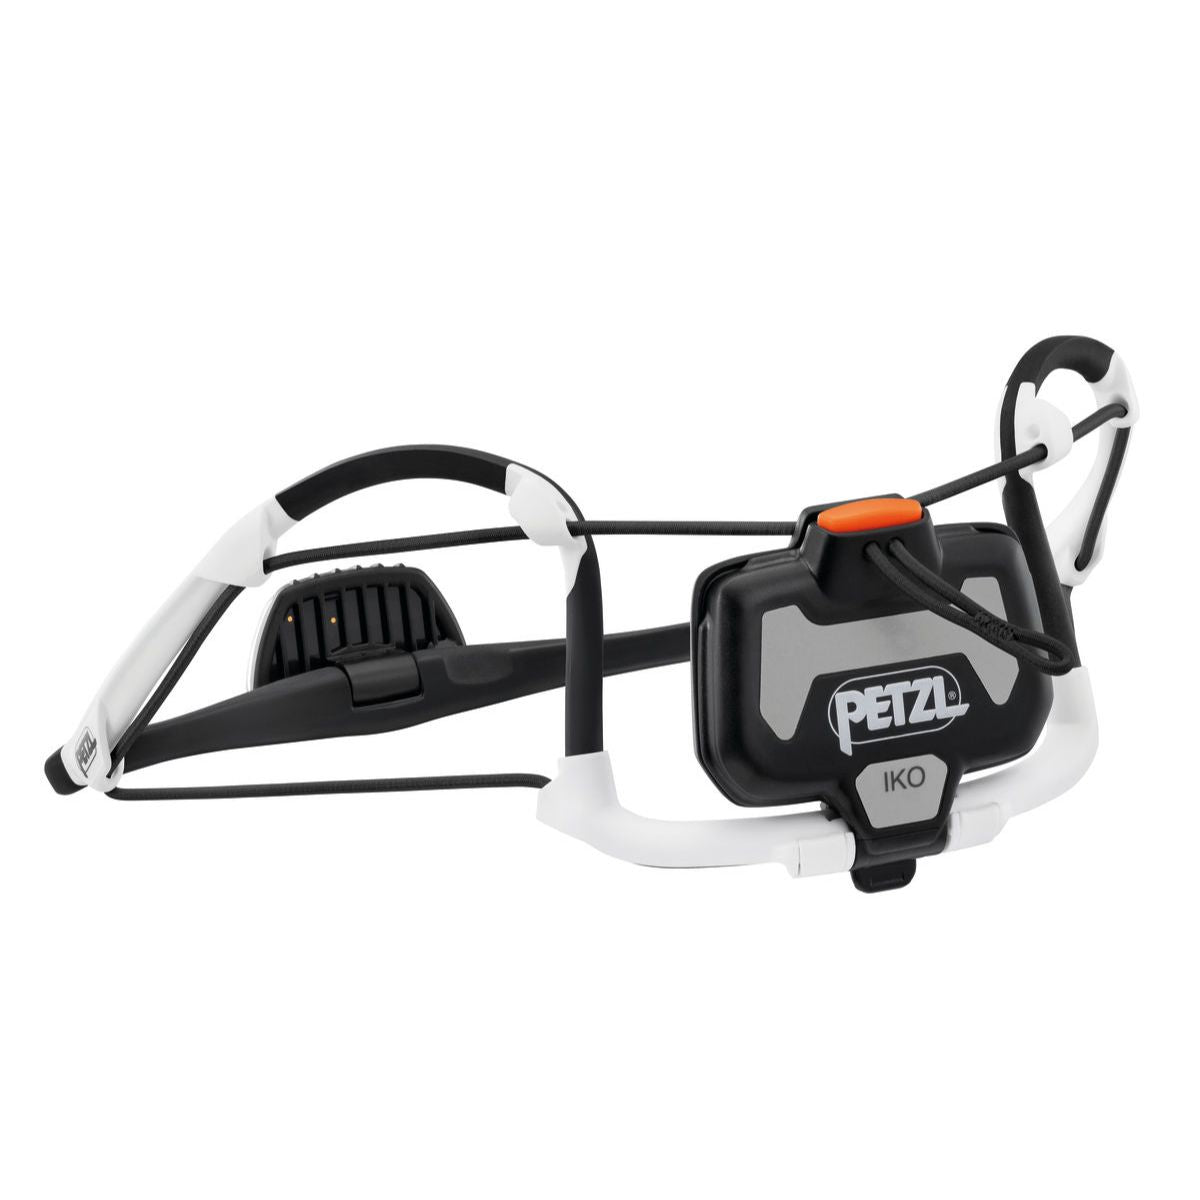 Petzl IKO in white and black battery pack